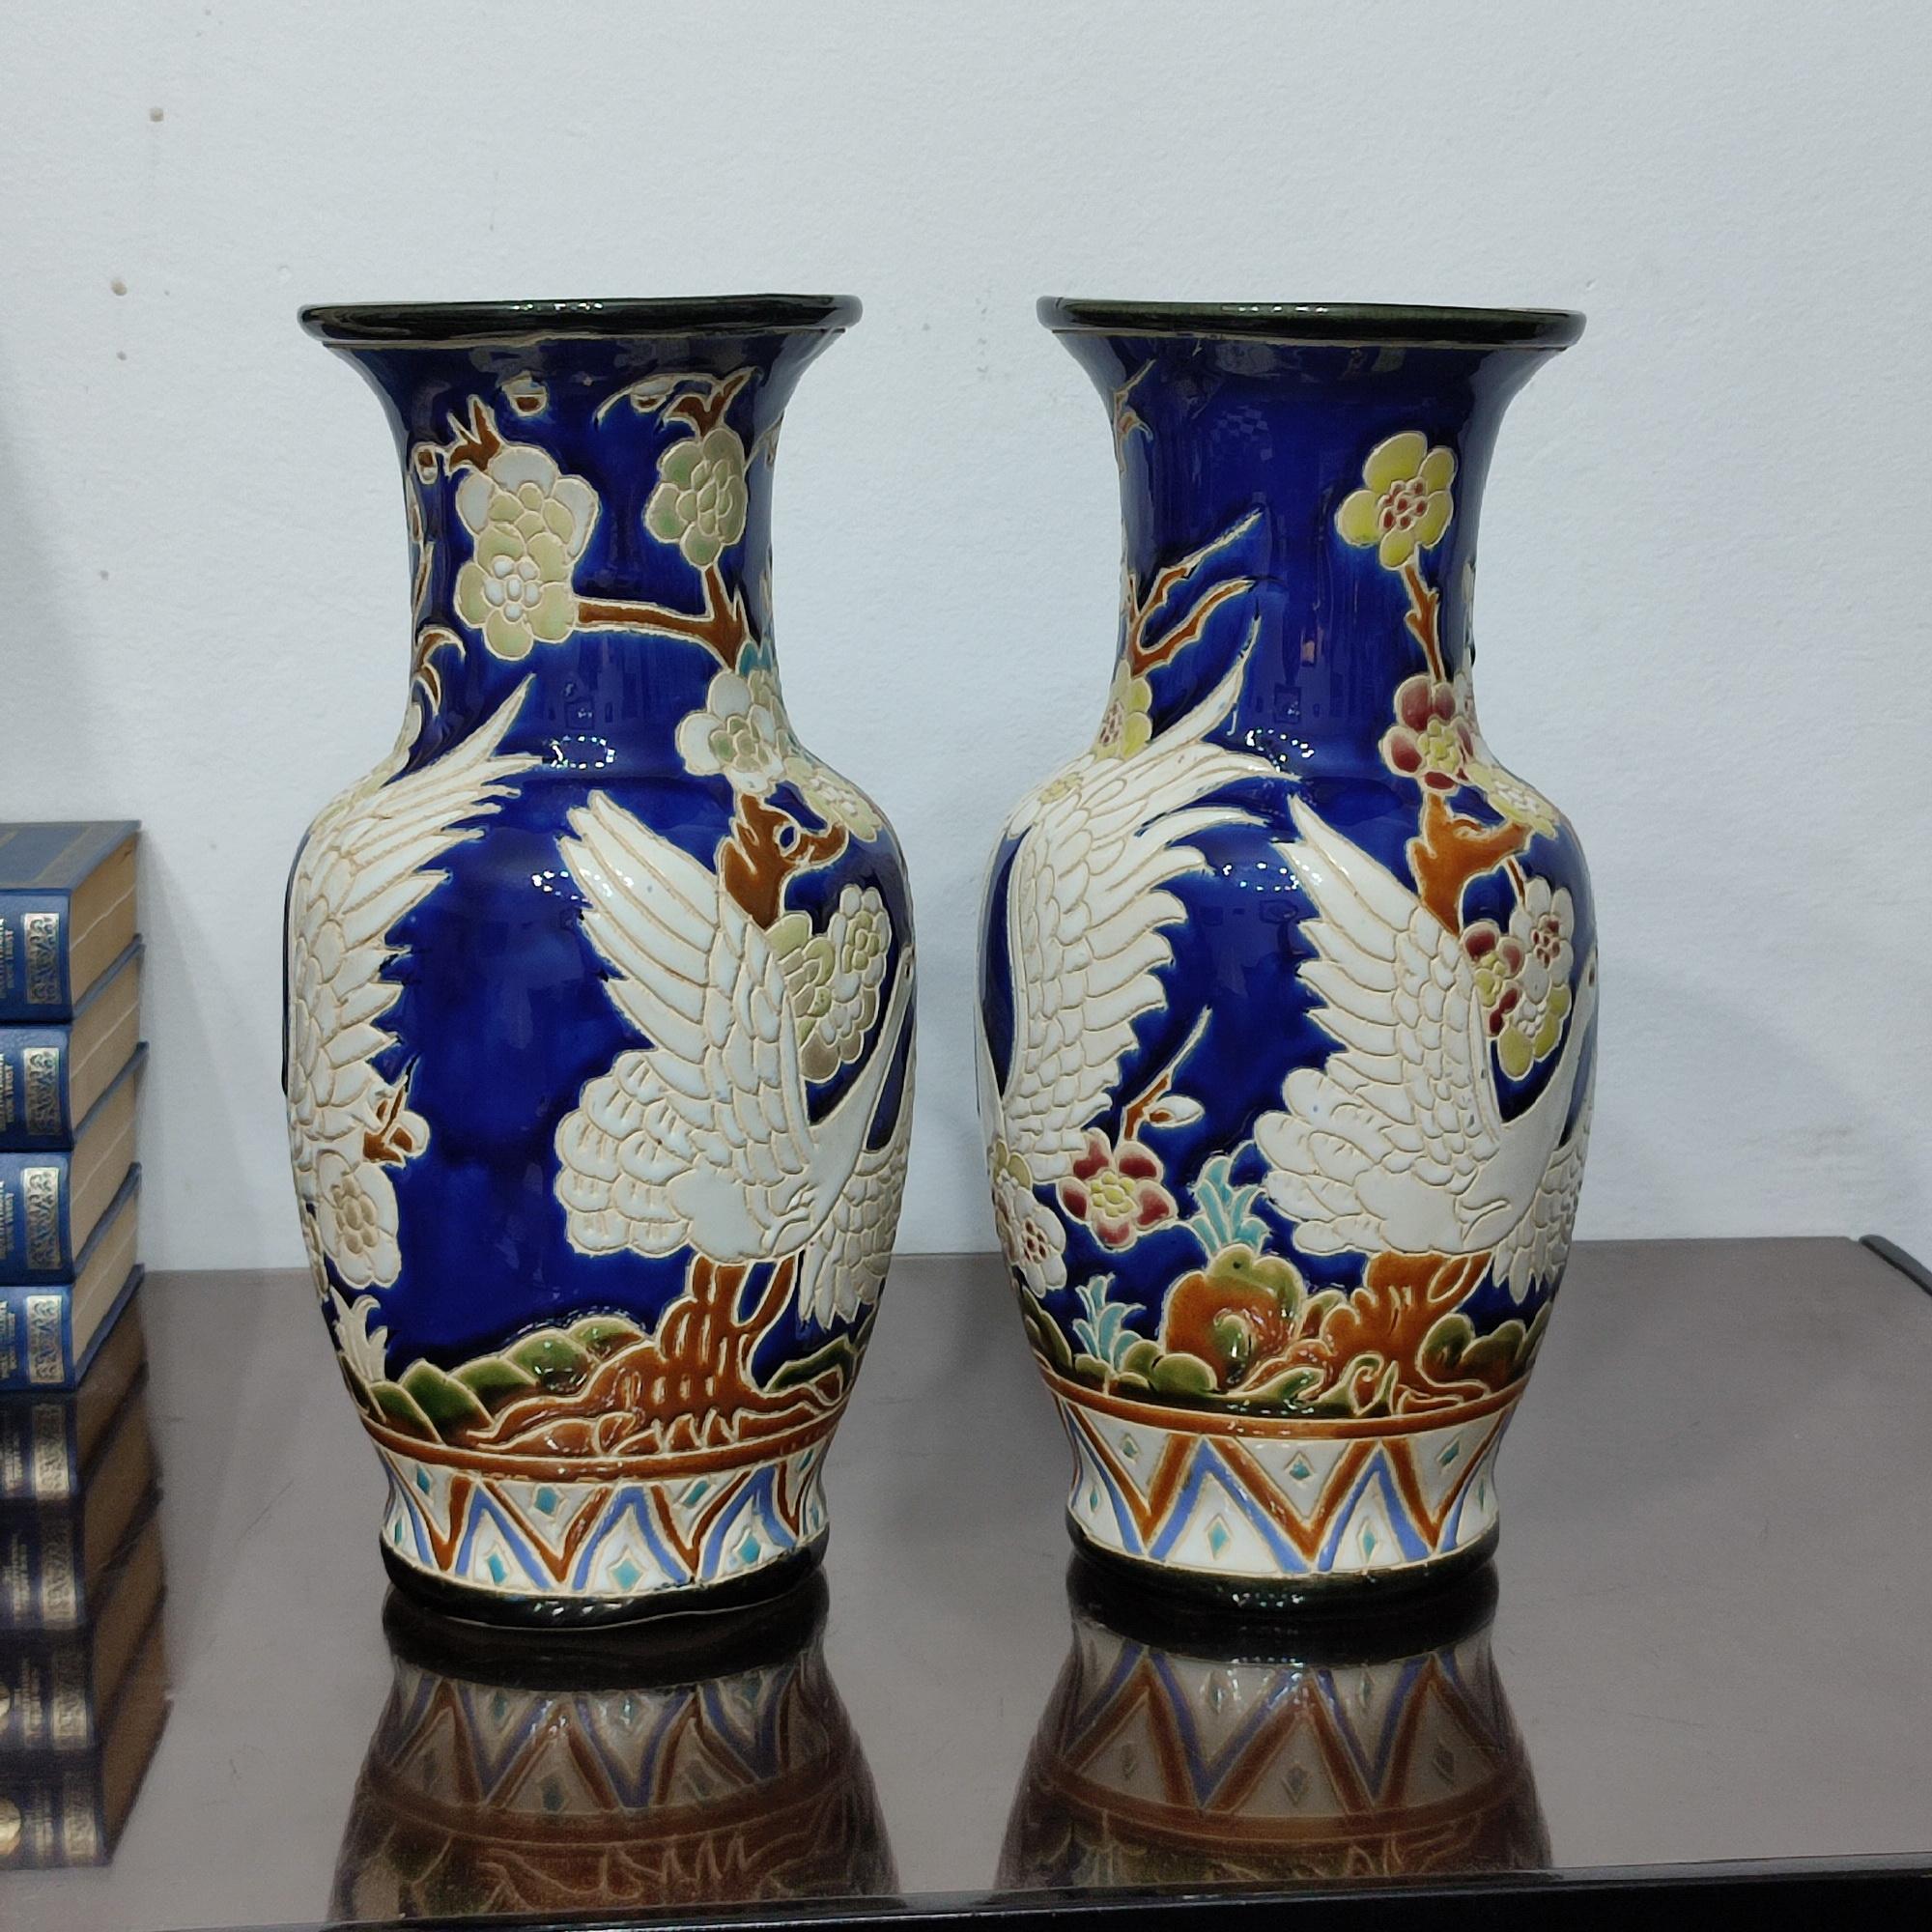 European Pair of Ceramic Vases with Wonderful Flying Swans and Cherry Flowers Decor